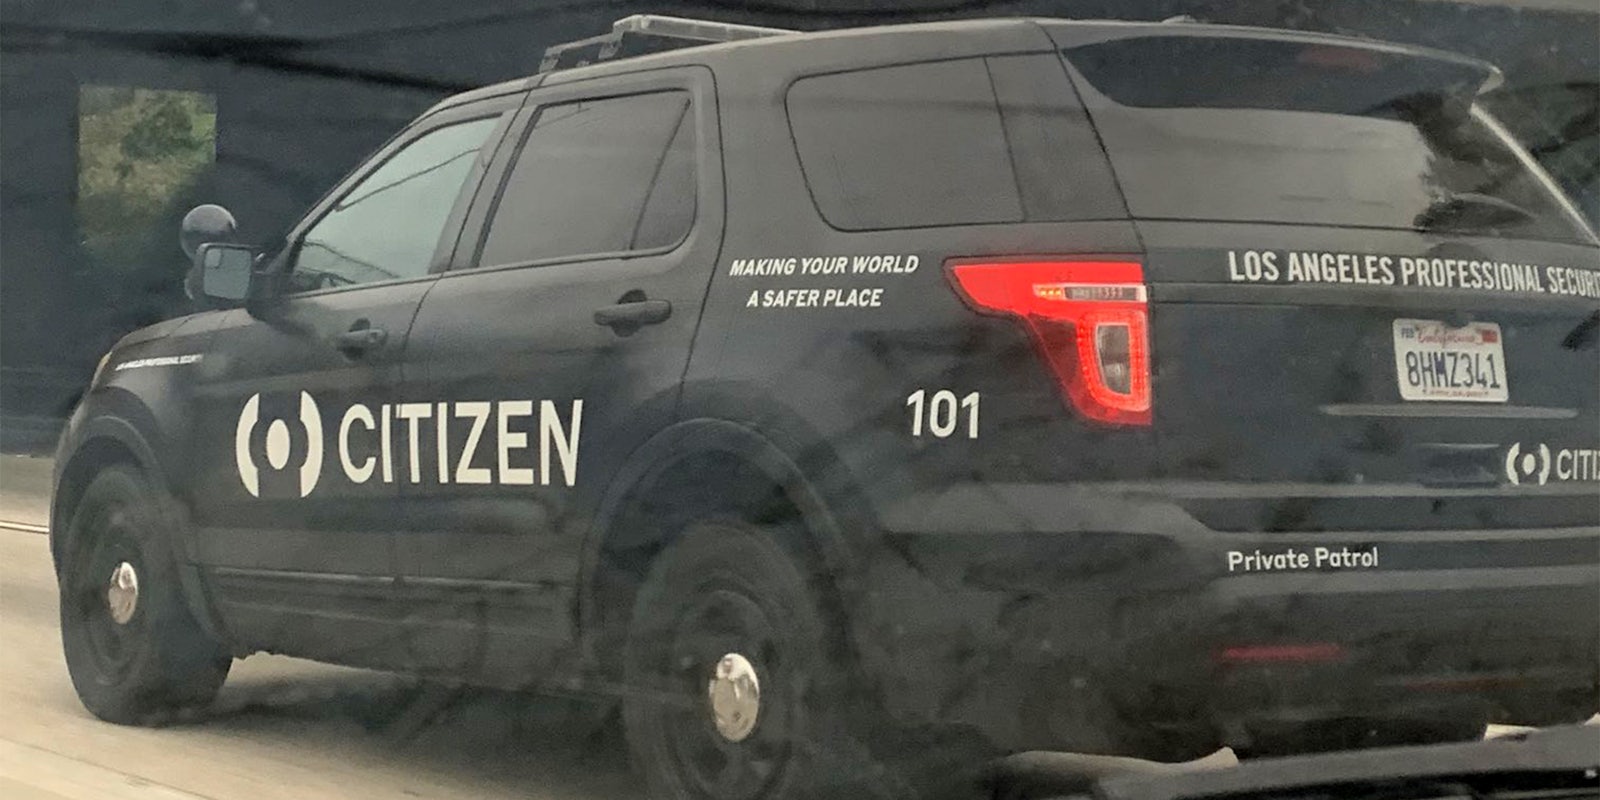 Black SUV with CITIZEN logo on the side